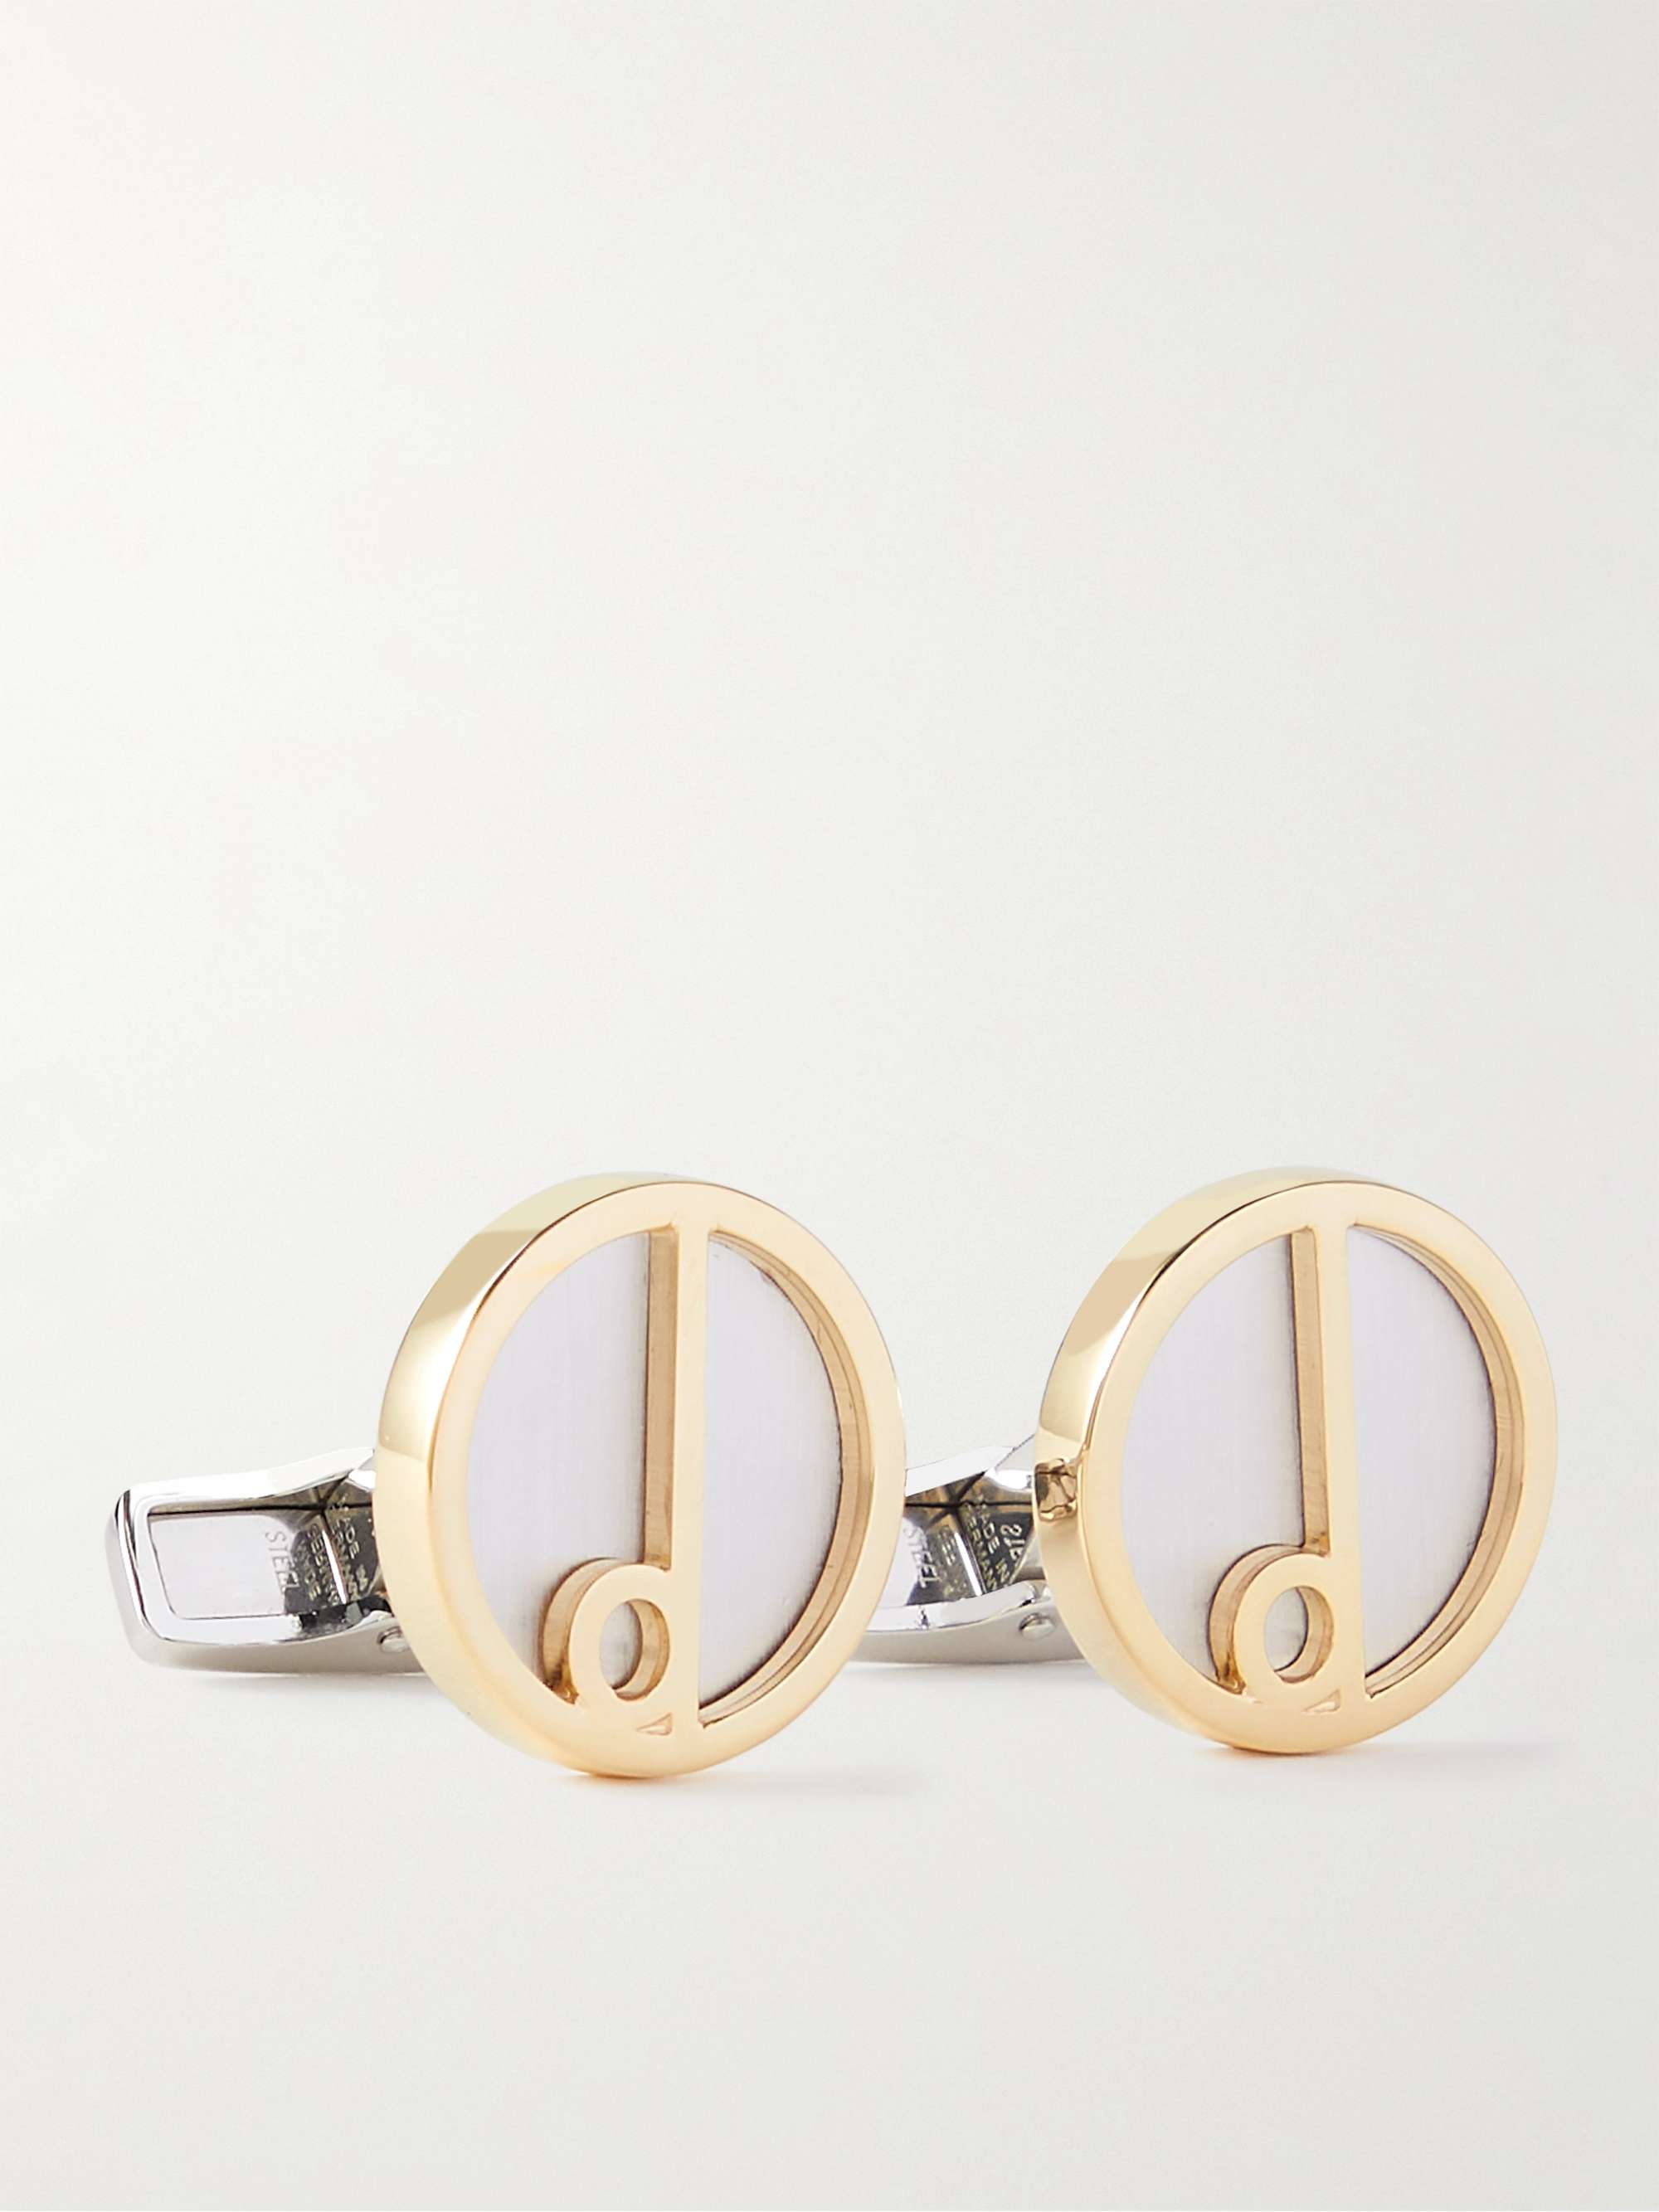 DUNHILL Gold- and Silver-Tone Cufflinks